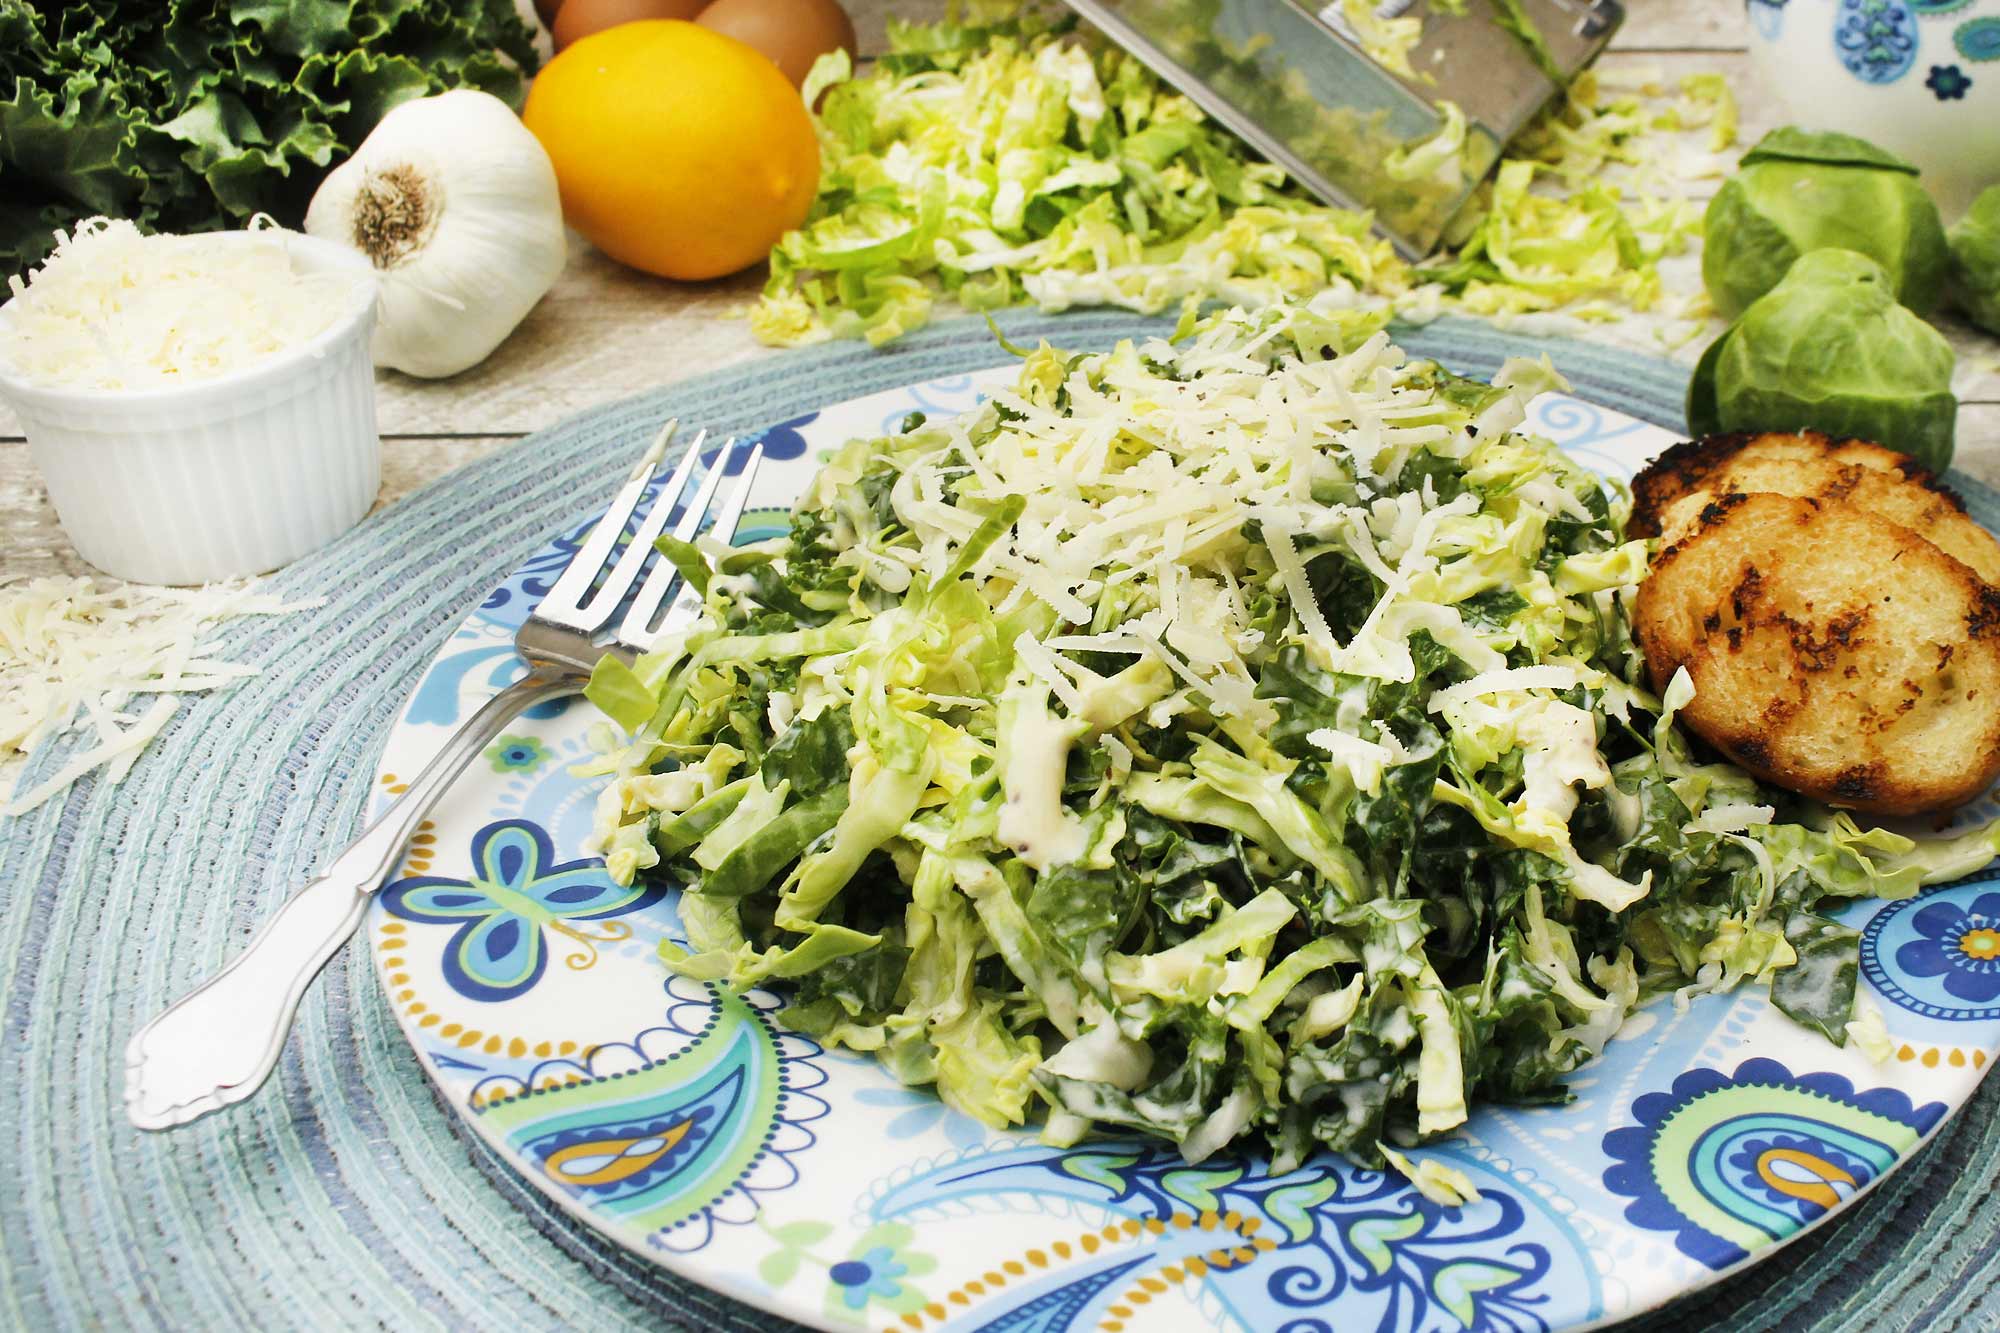 Kale & Brussels Sprouts Caesar Salad